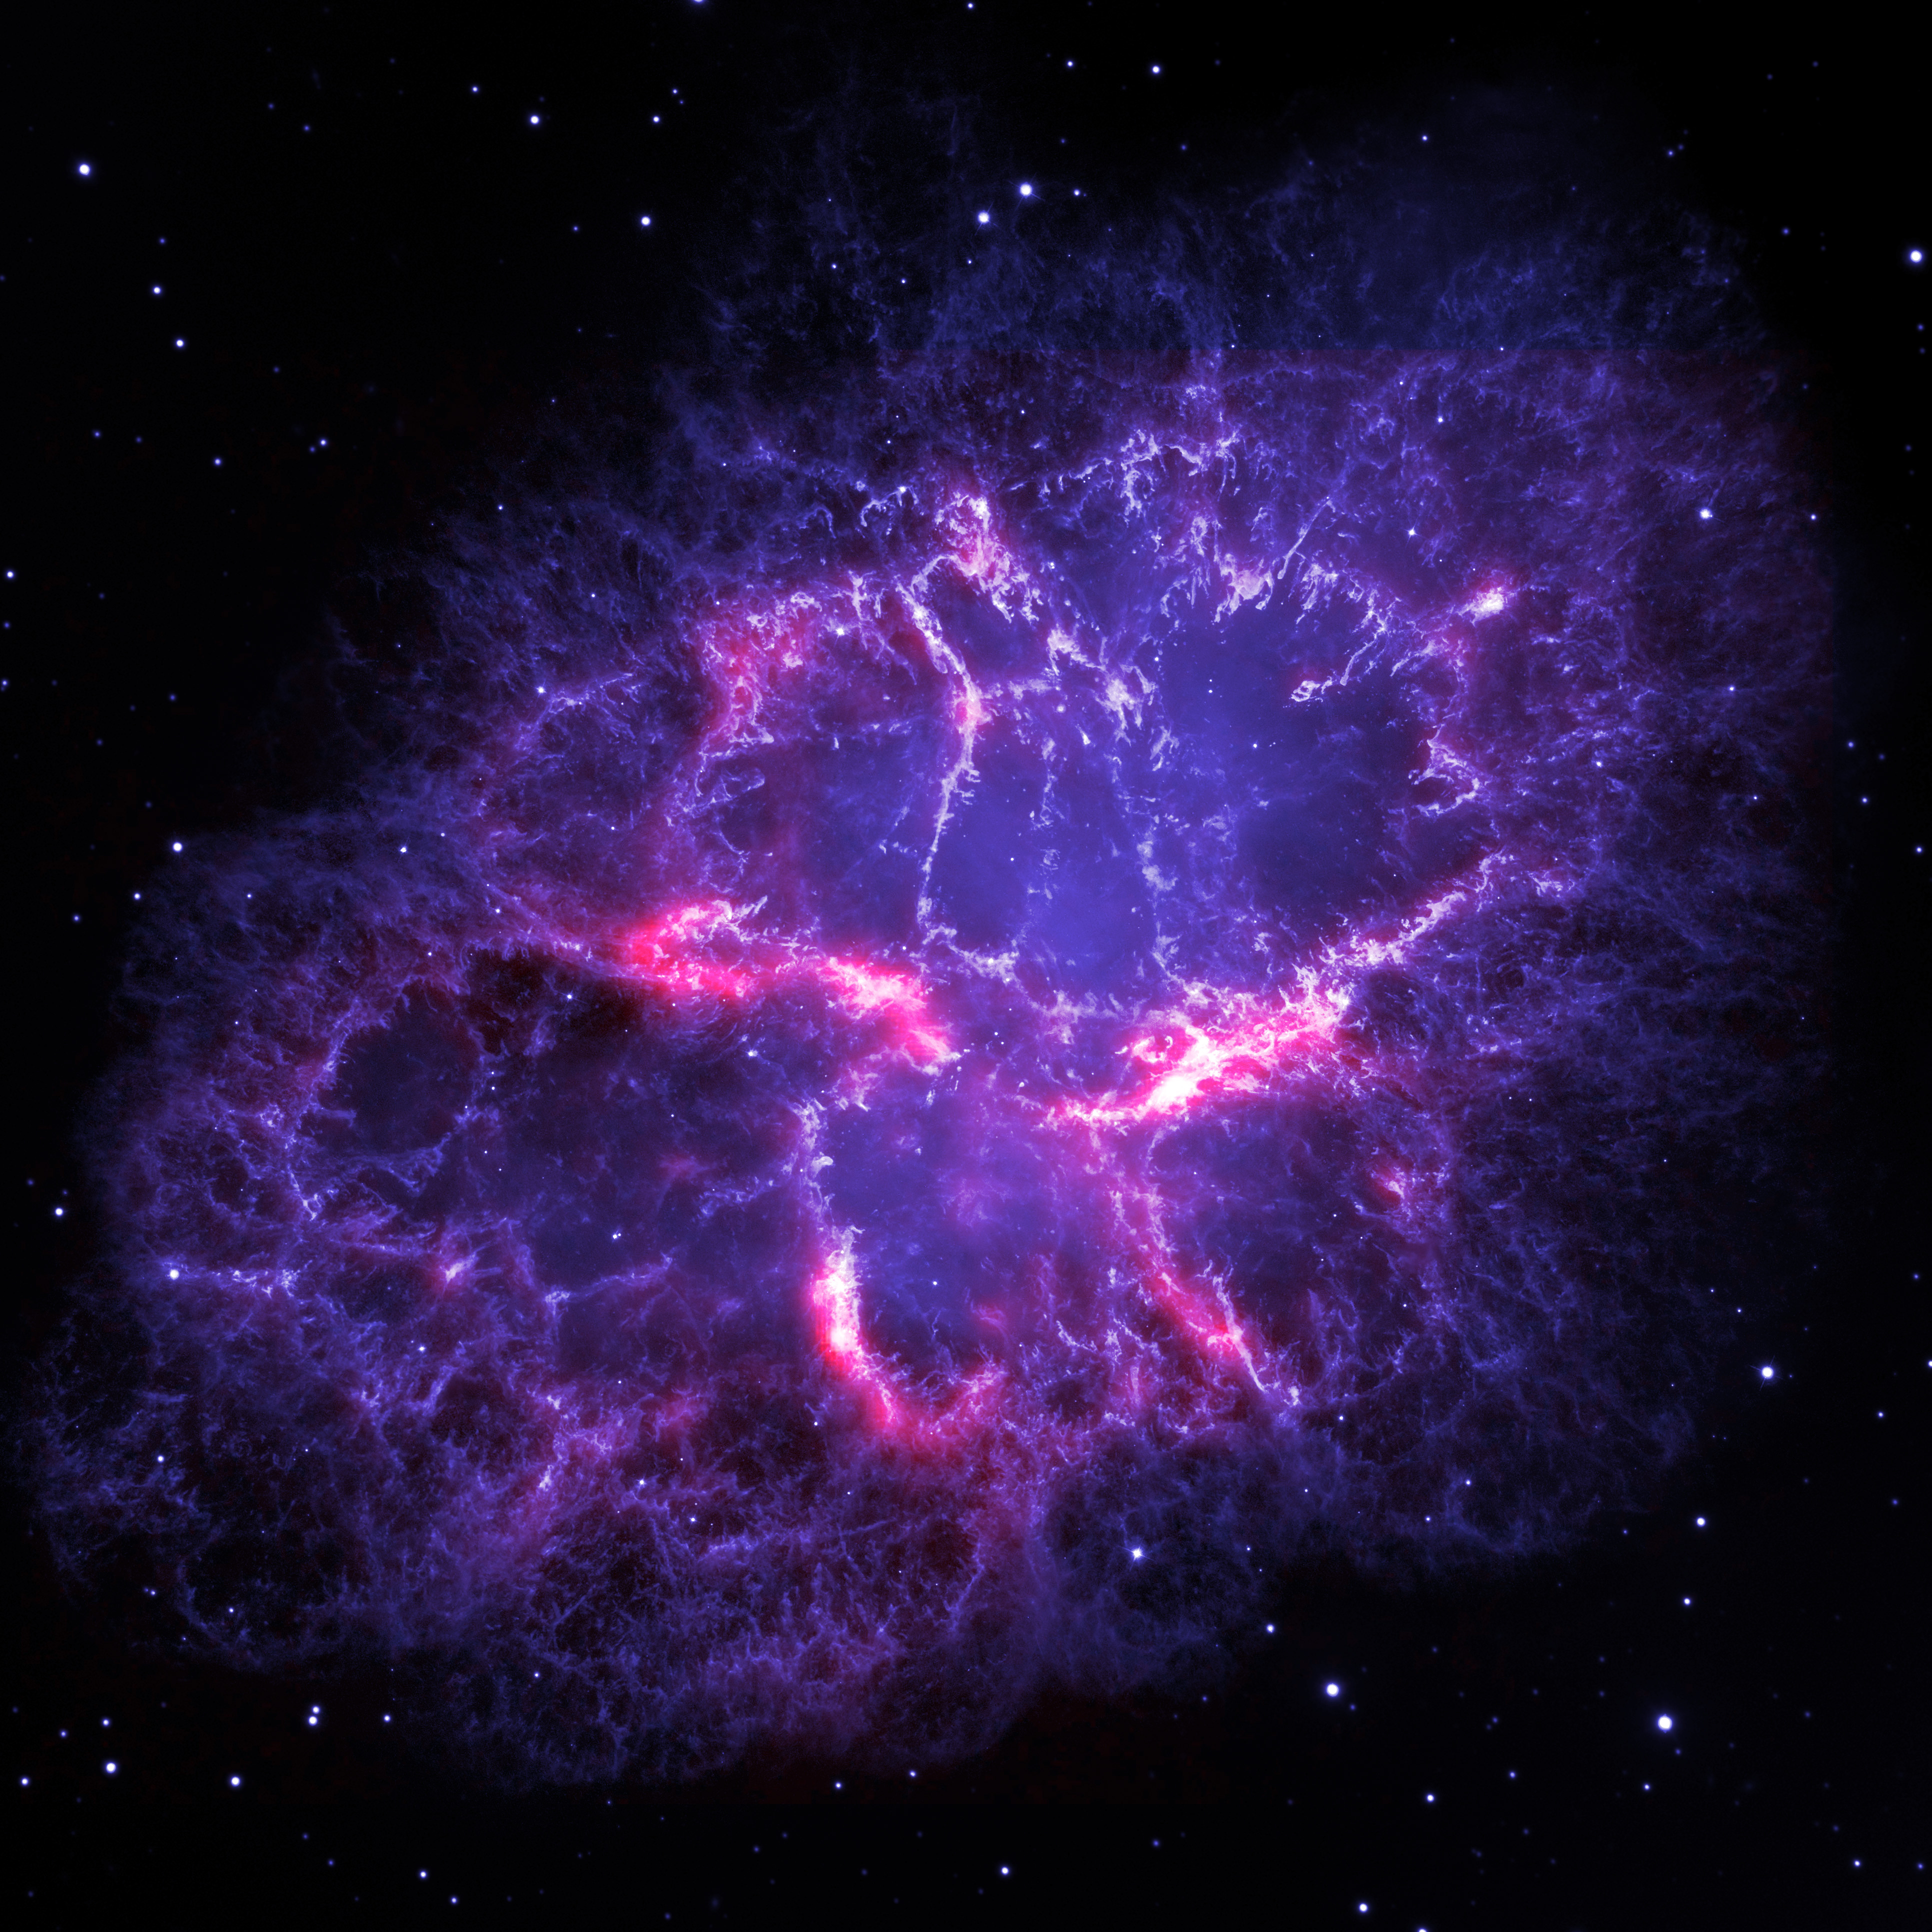 Crab Nebula, as Seen by Herschel and Hubble | NASA